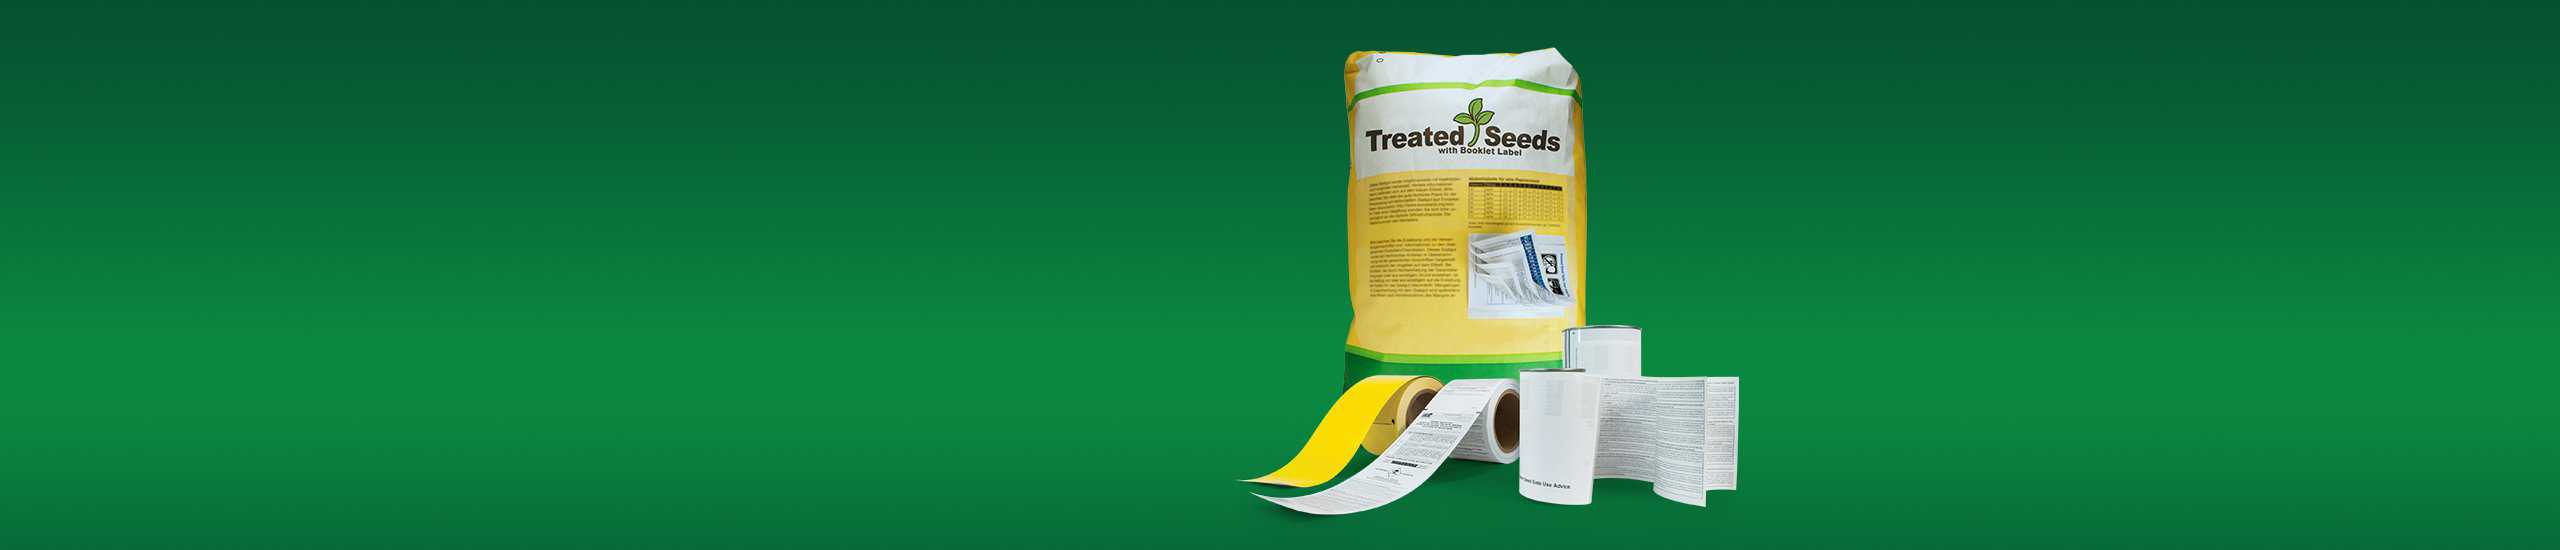 Ag & Specialty Chemical Seed Labels